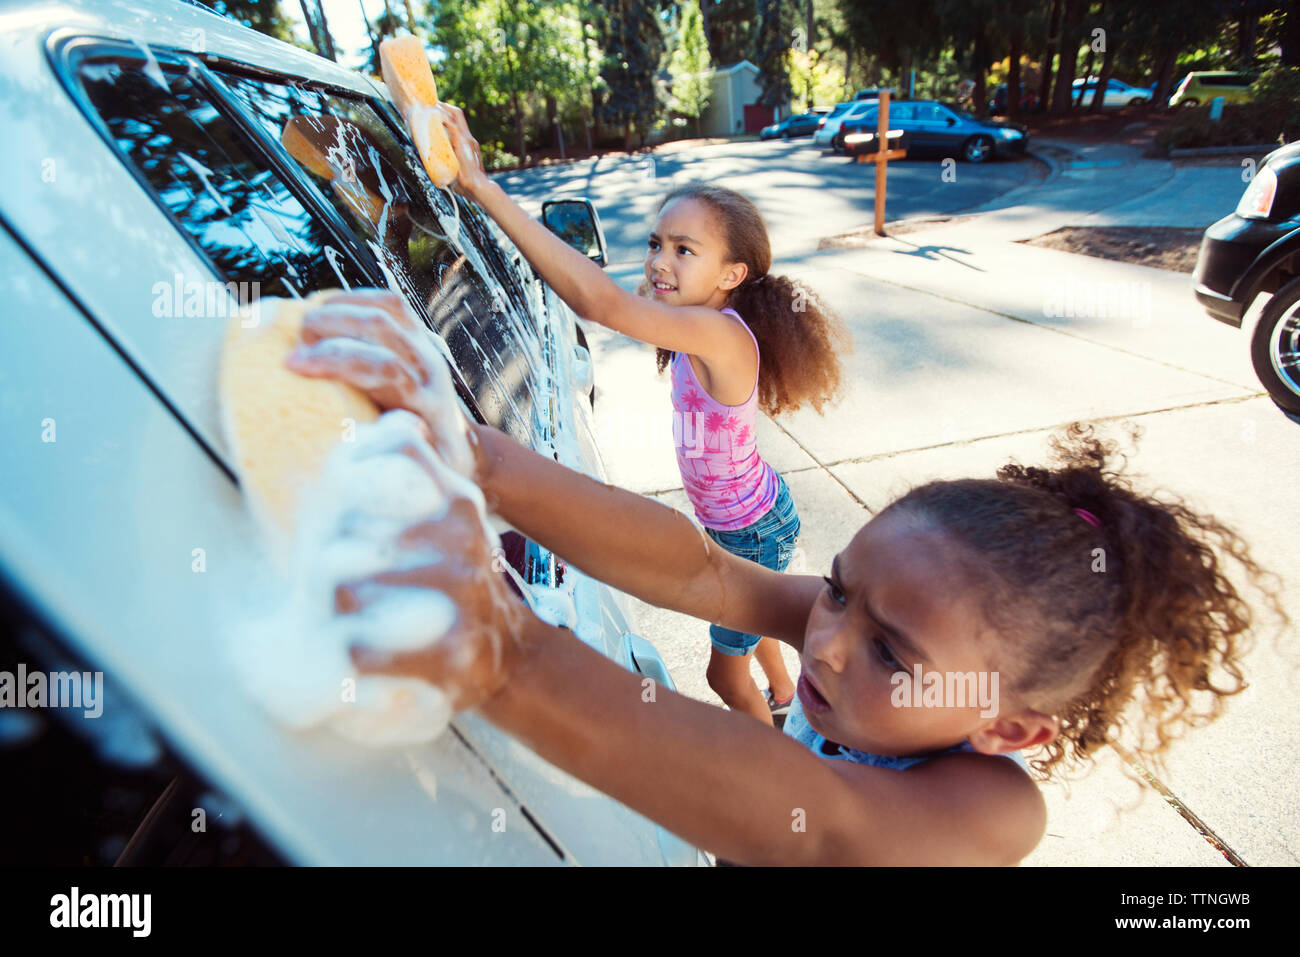 High angle view of girls washing car in driveway Stock Photo